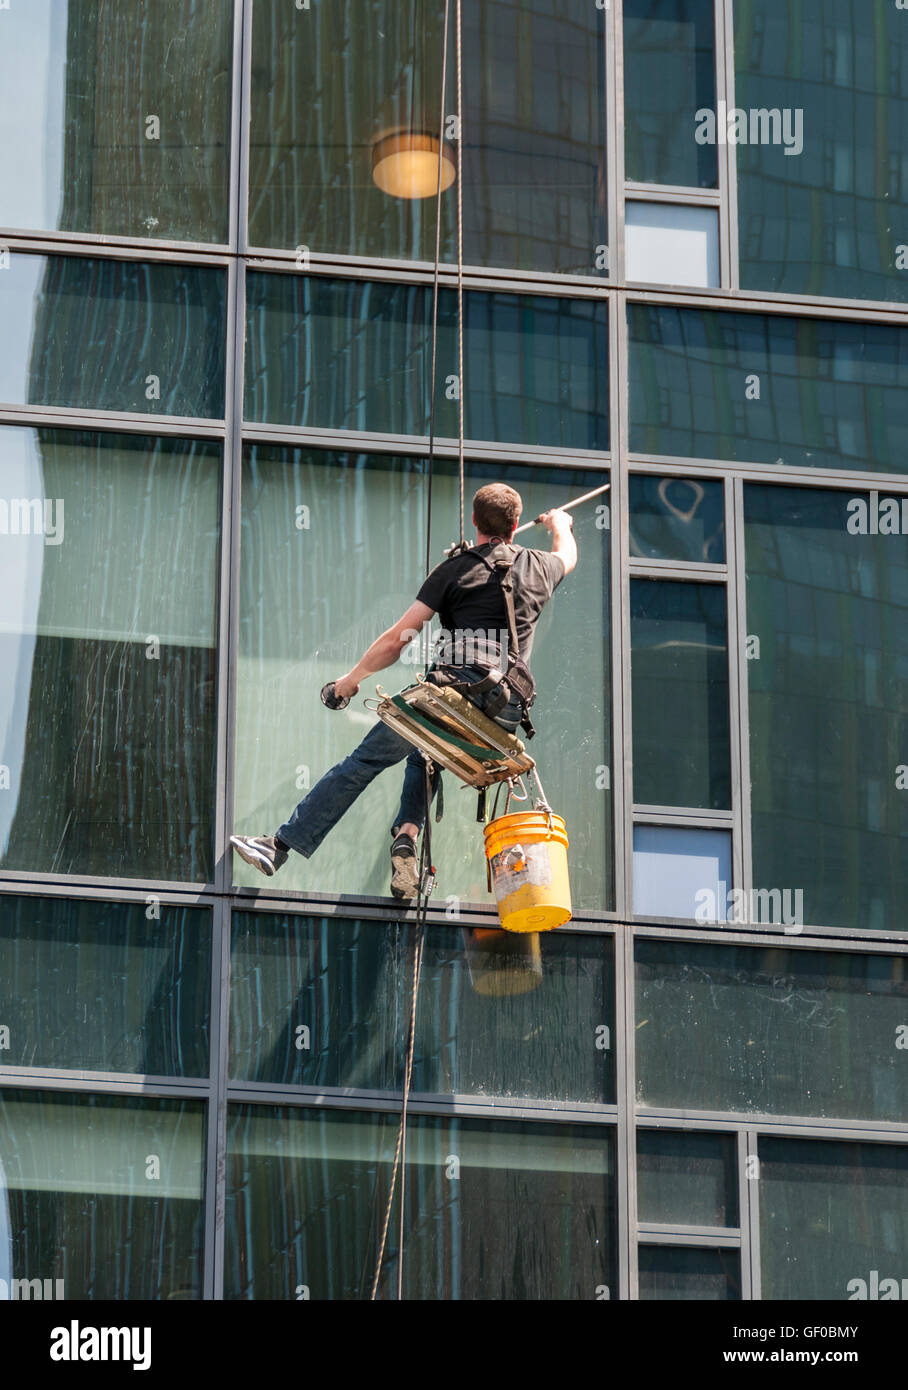 Washing windows of a building Stock Photo